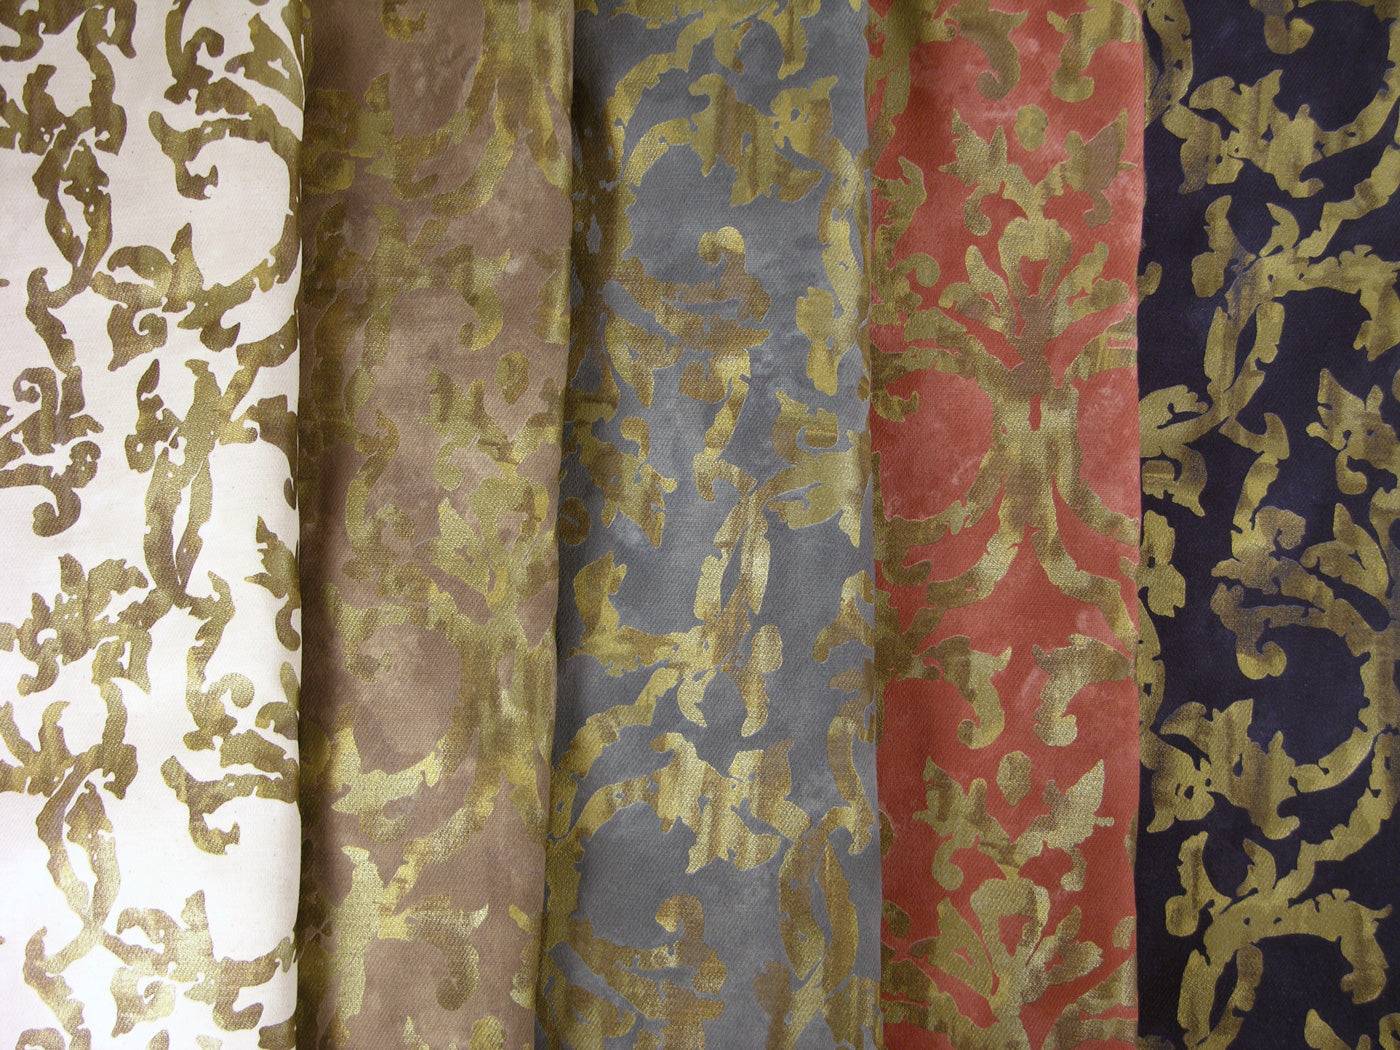 stack of fabrics with metallic gold branching design printed on them